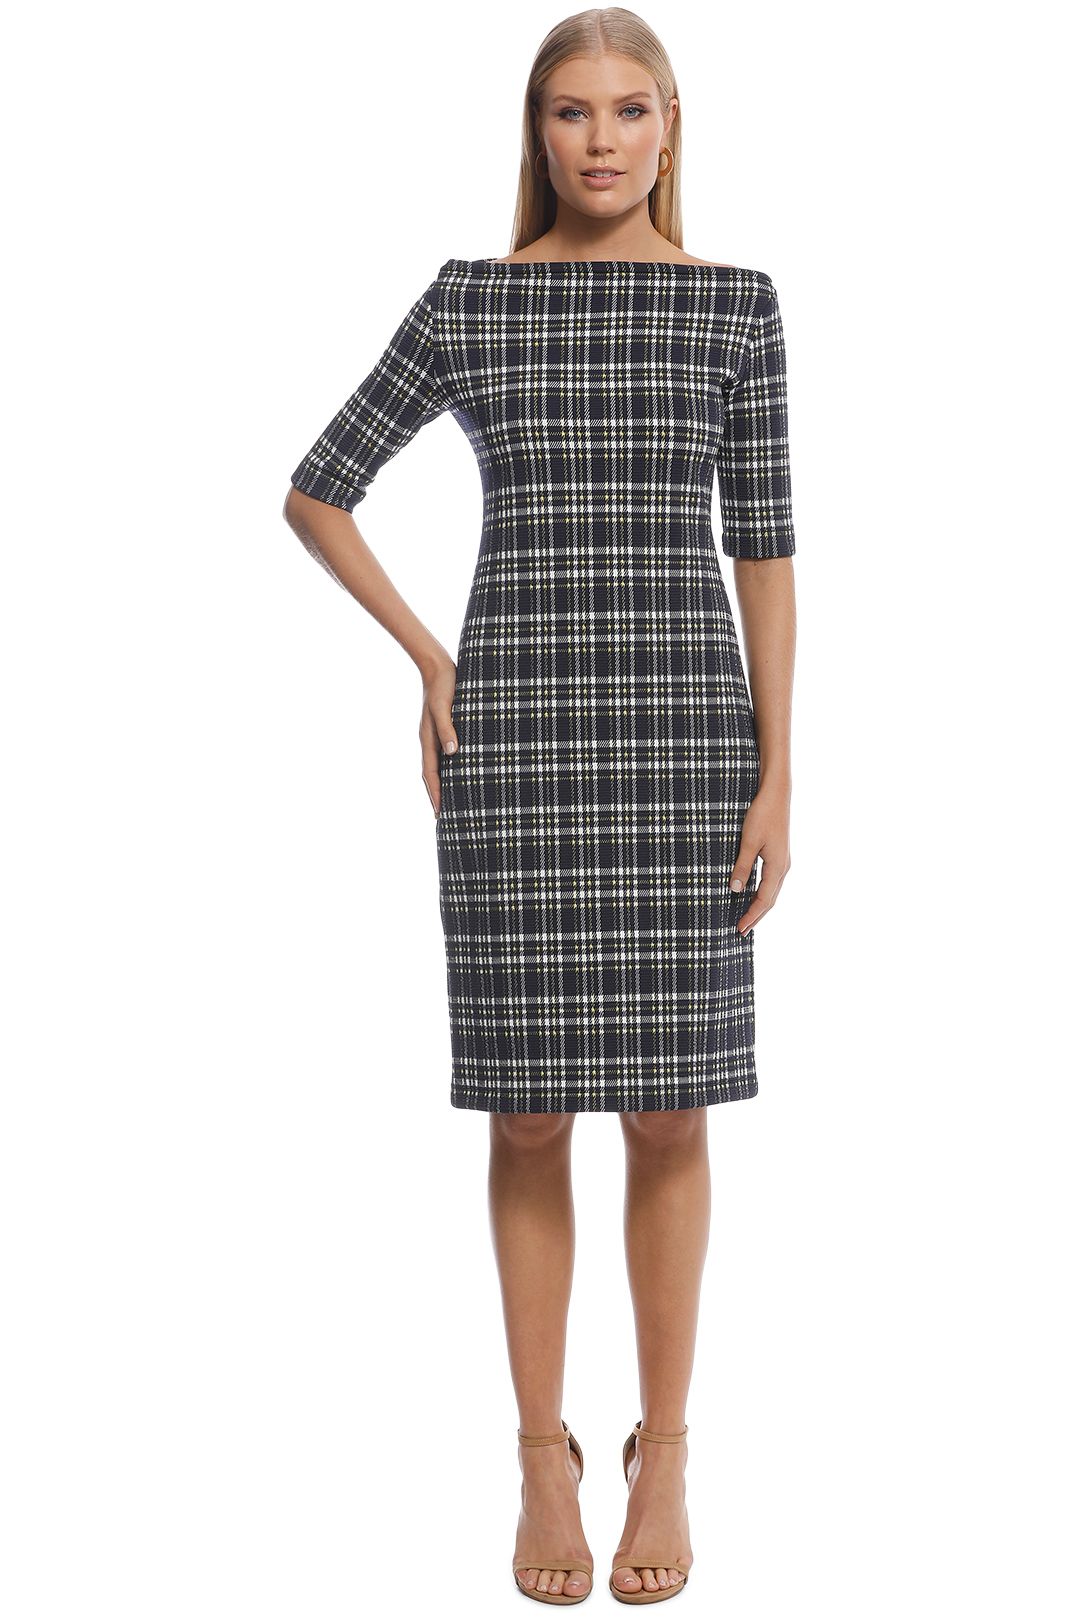 Scanlan Theodore - Plaid Boat Neck Dress - Navy Yellow - Front